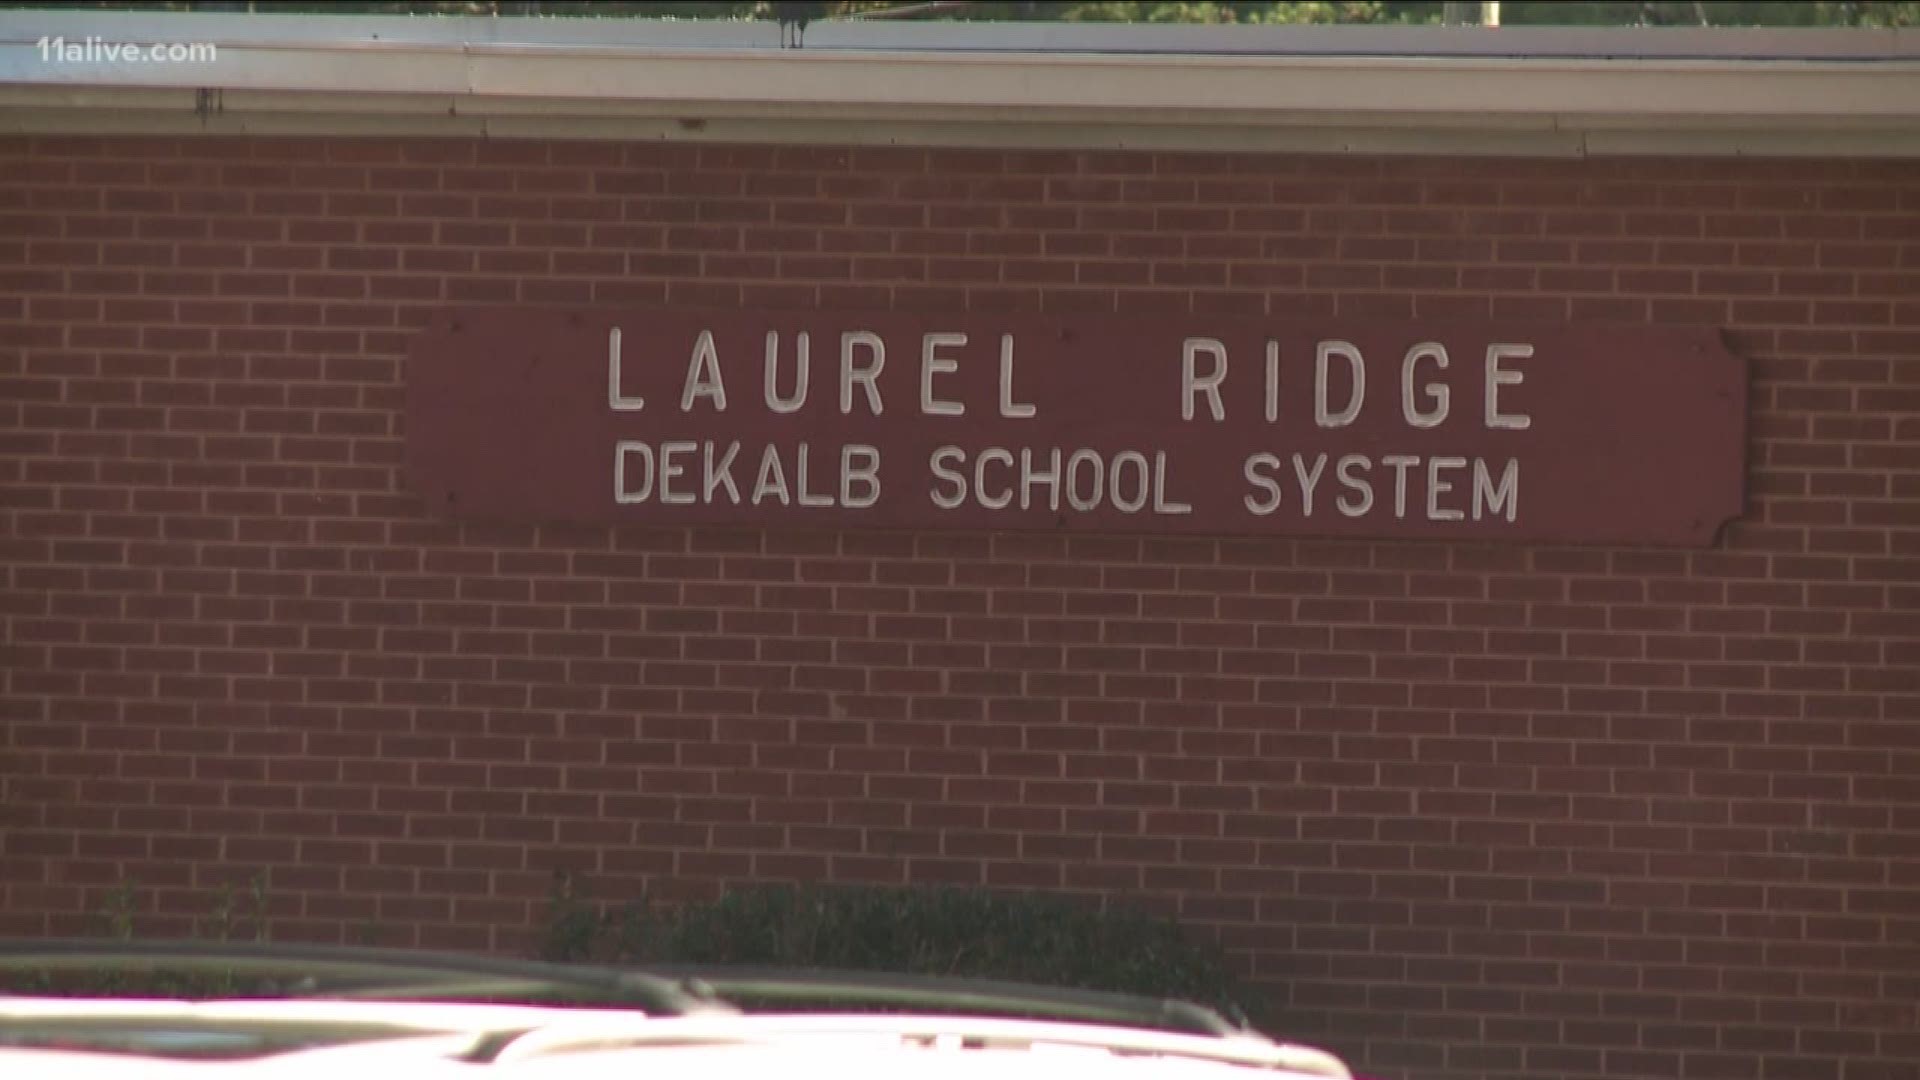 The DeKalb County School District confirmed that there were heating issues in multiple rooms at Laurel Ridge Elementary School and that they are "diligently working on a solution."